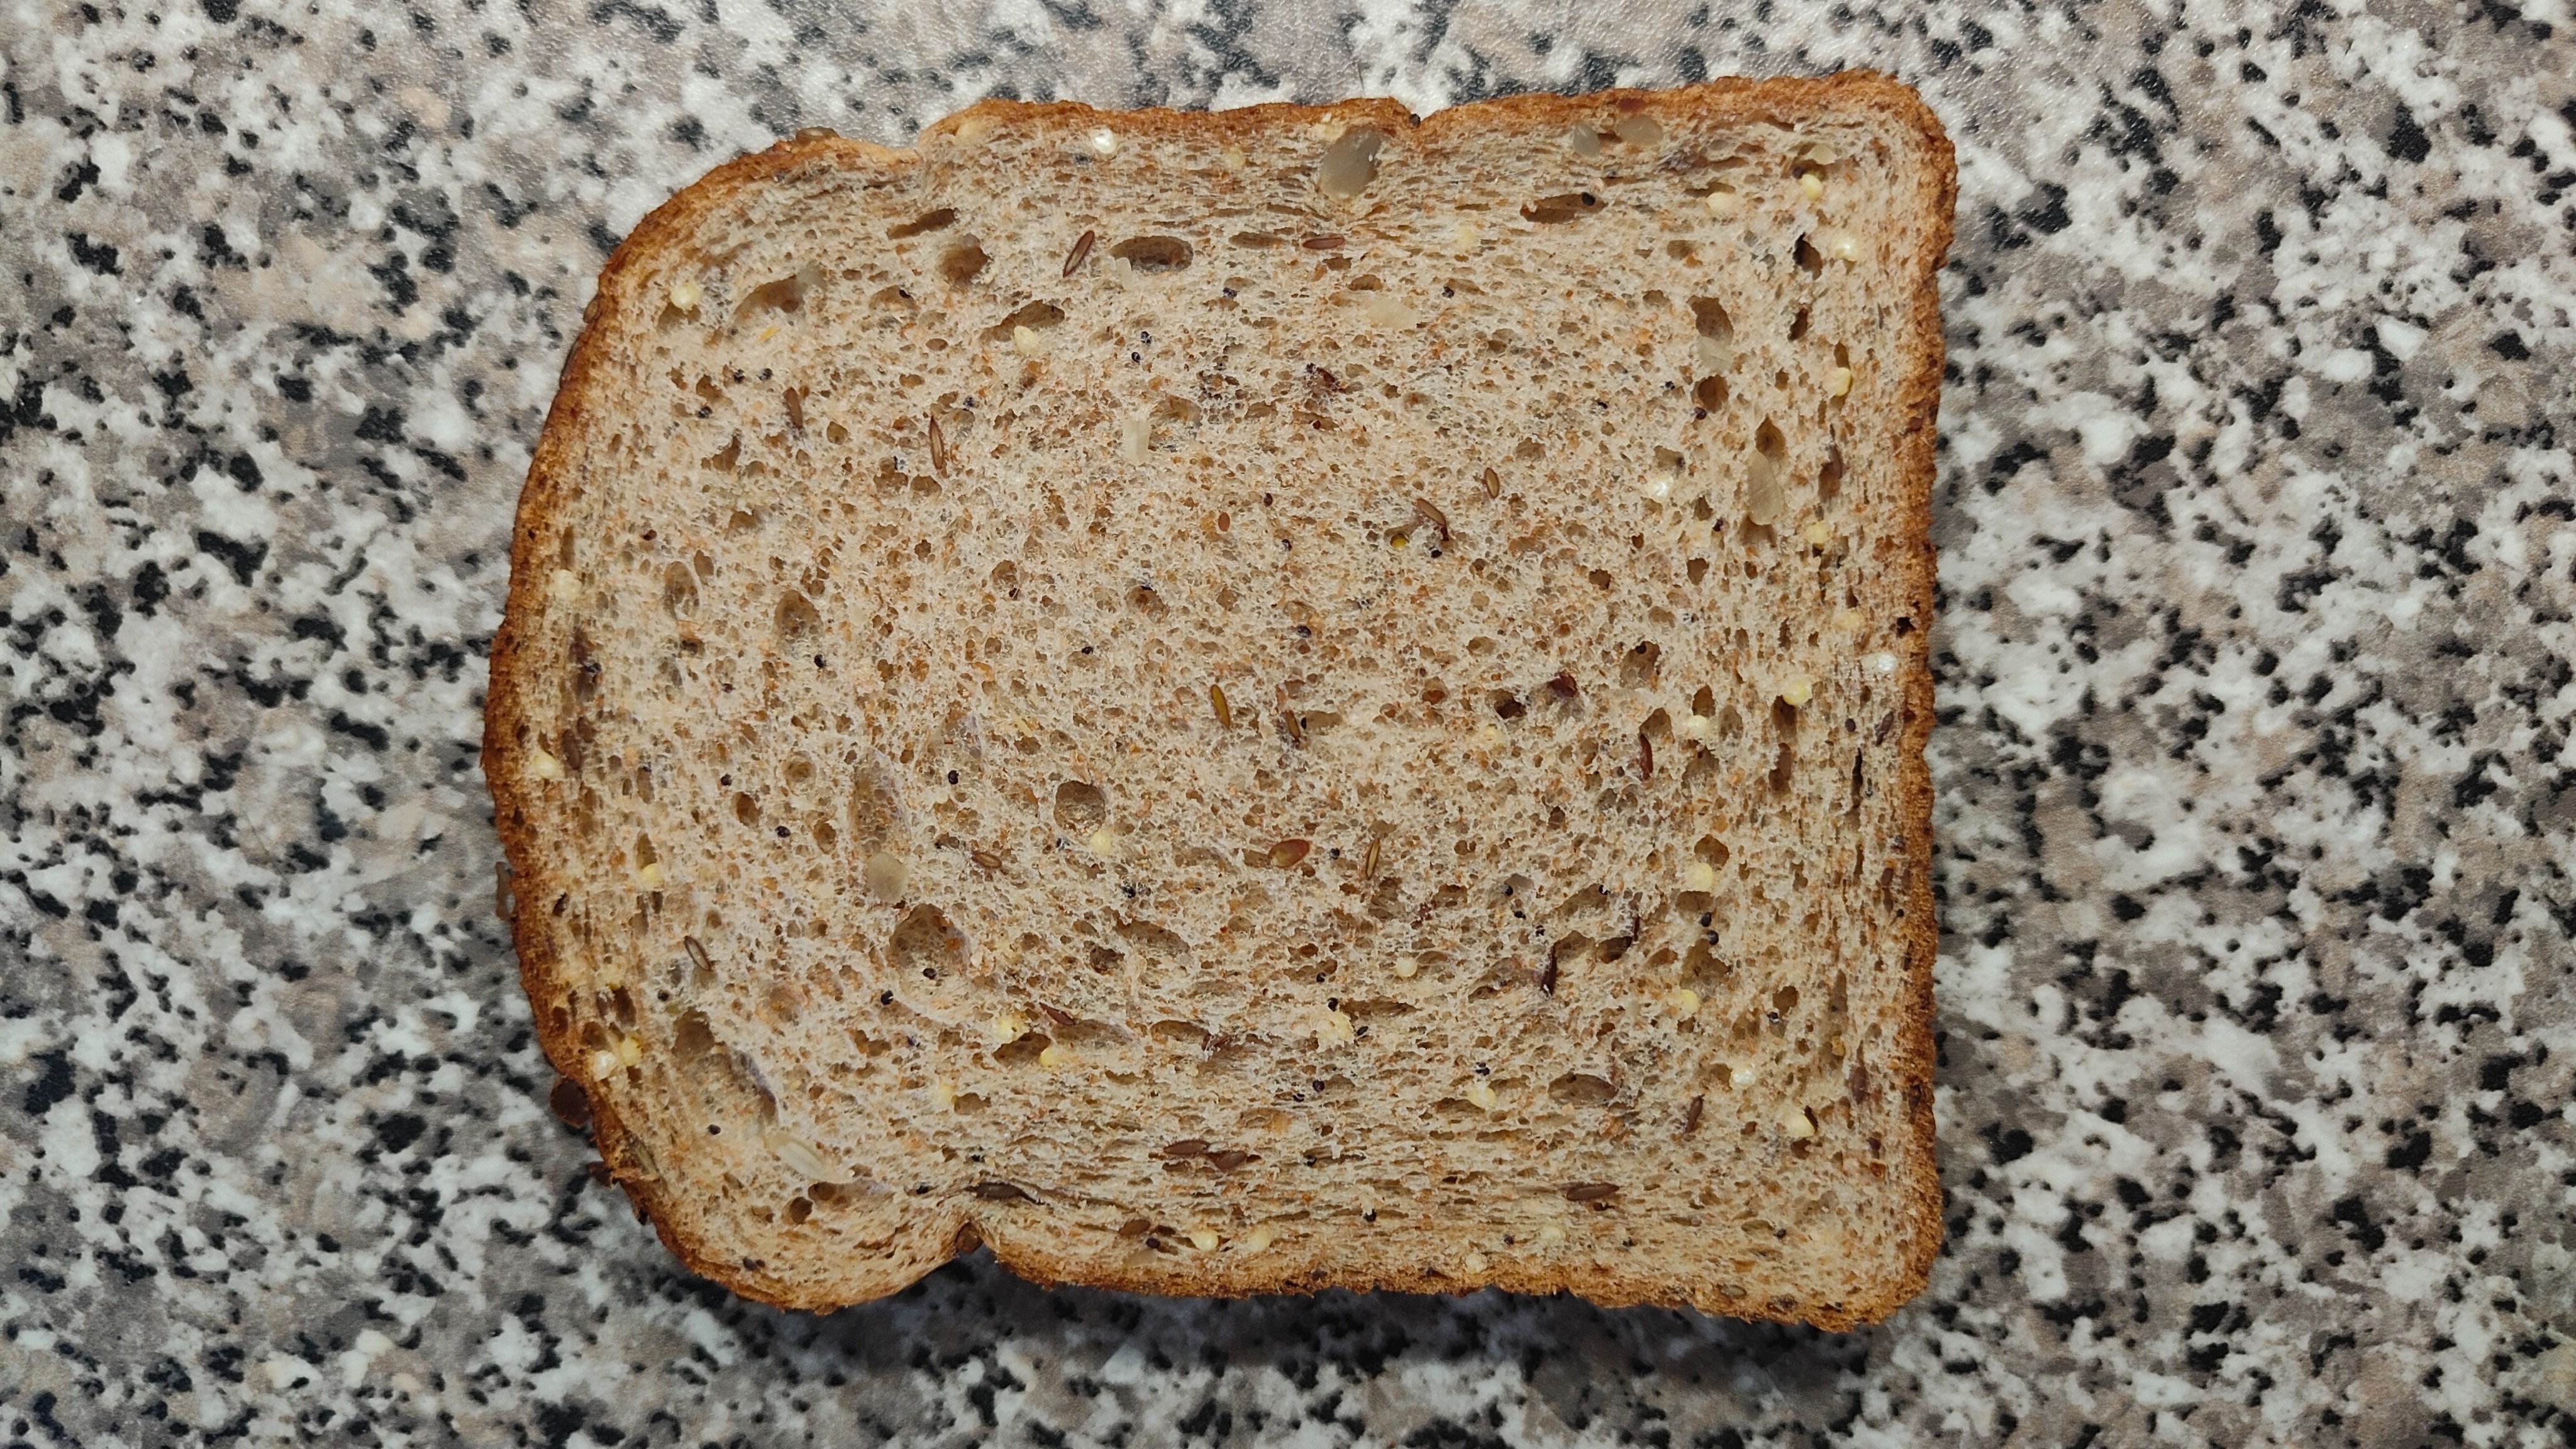 Picture of bread taken using the Realme GT 2 Pro